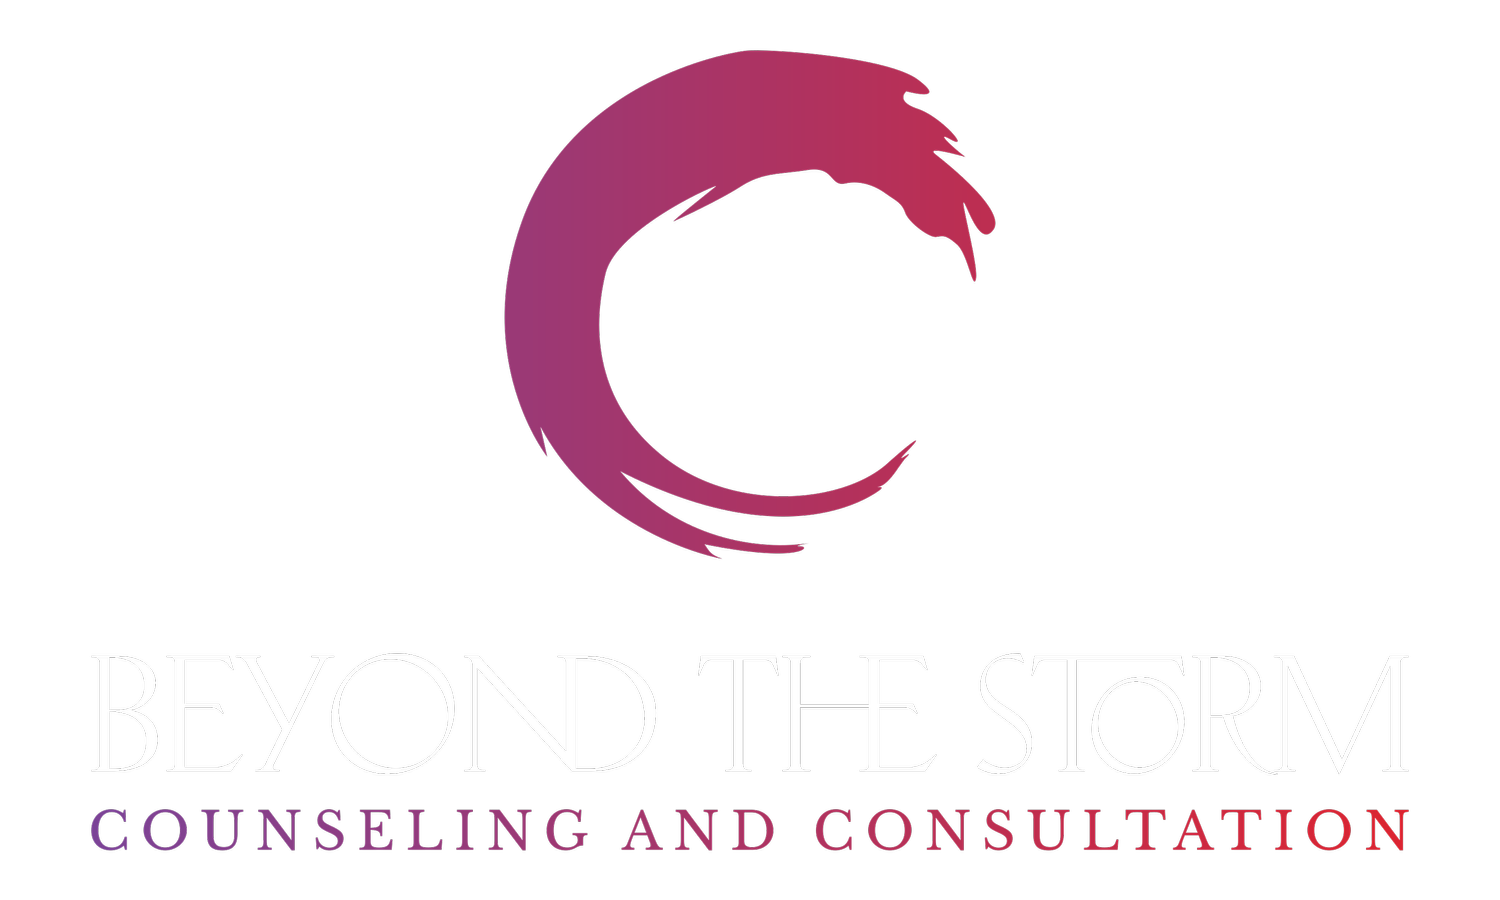 Beyond the Storm Counseling